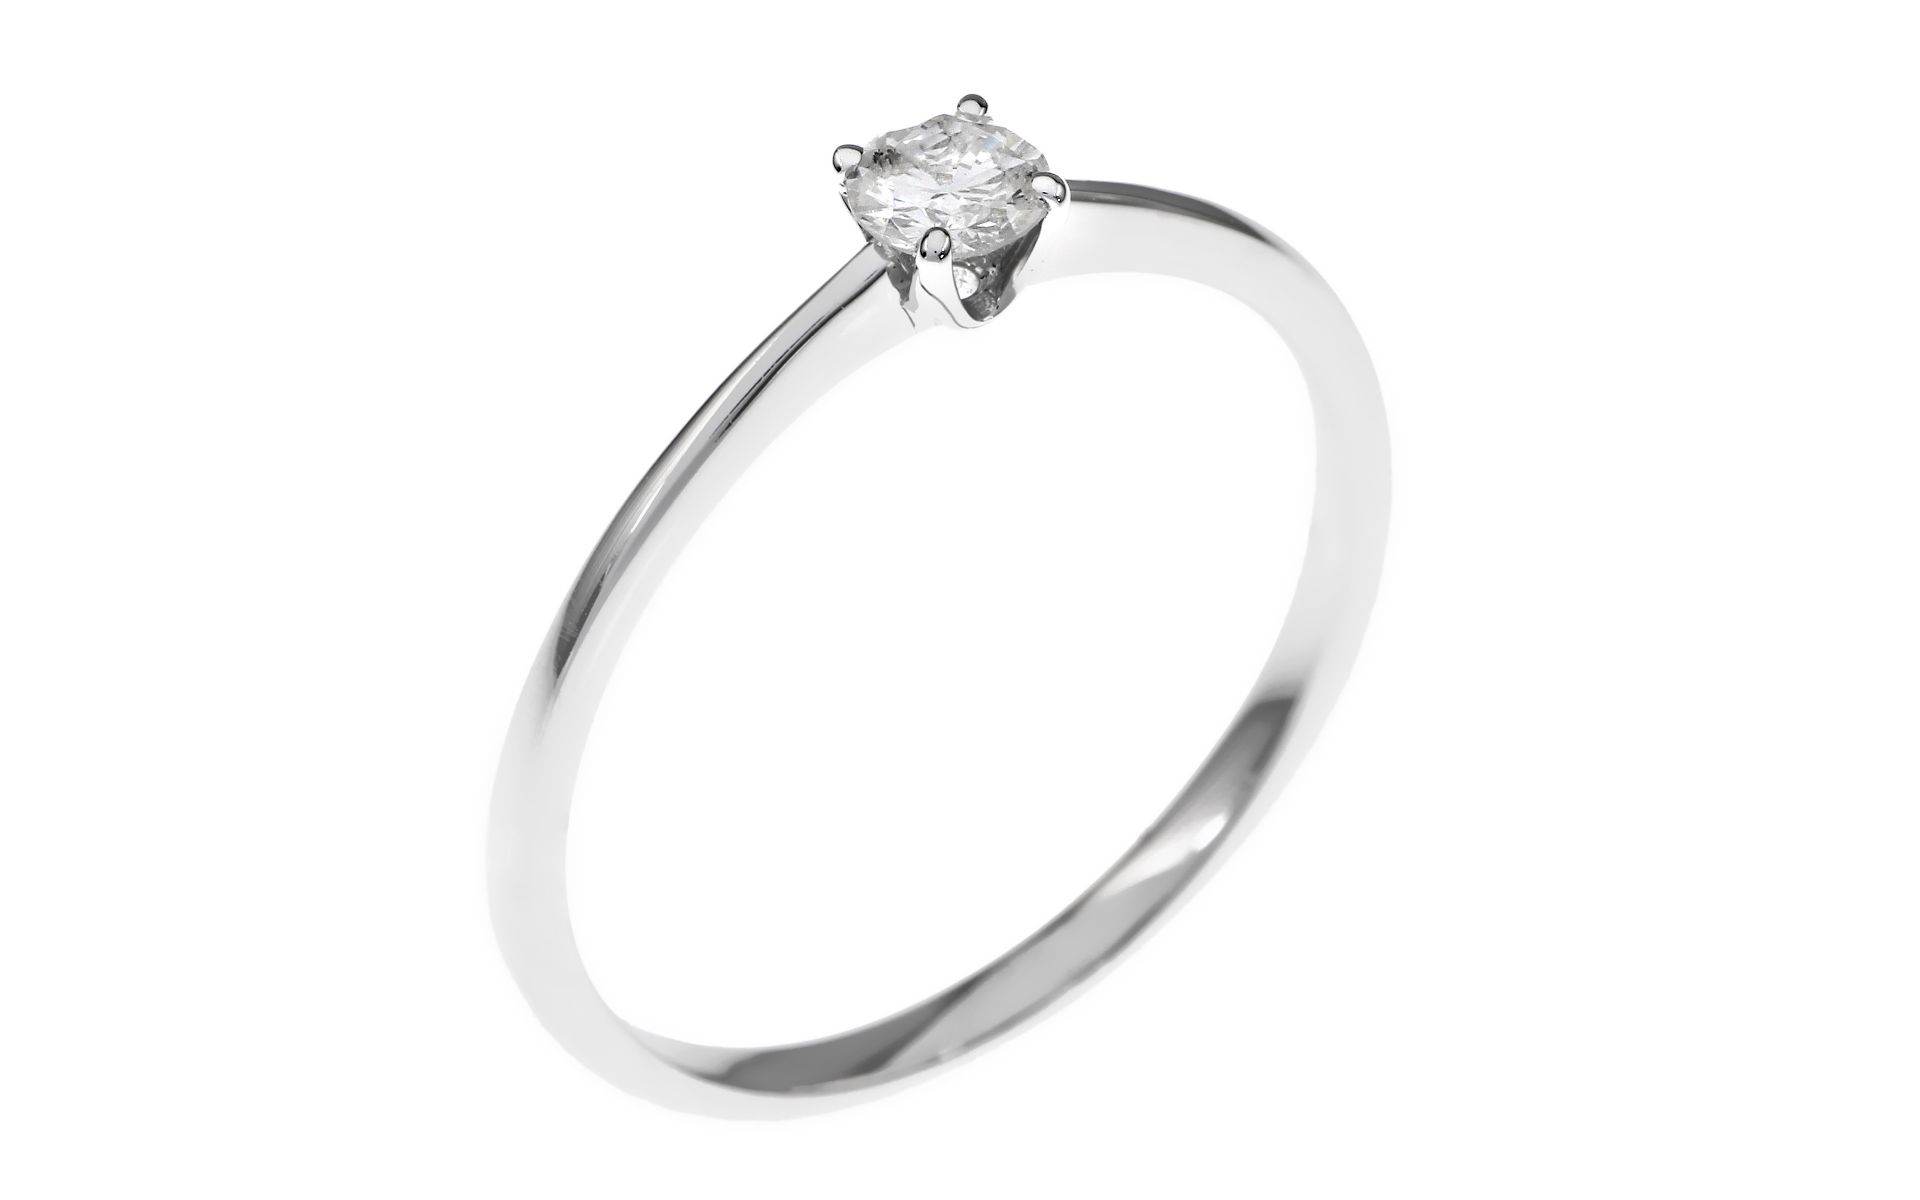 Solitaer Ring 1.71 gr. 750/- Weissgold mit Diamant 0.24 ct Ringgroesse 56